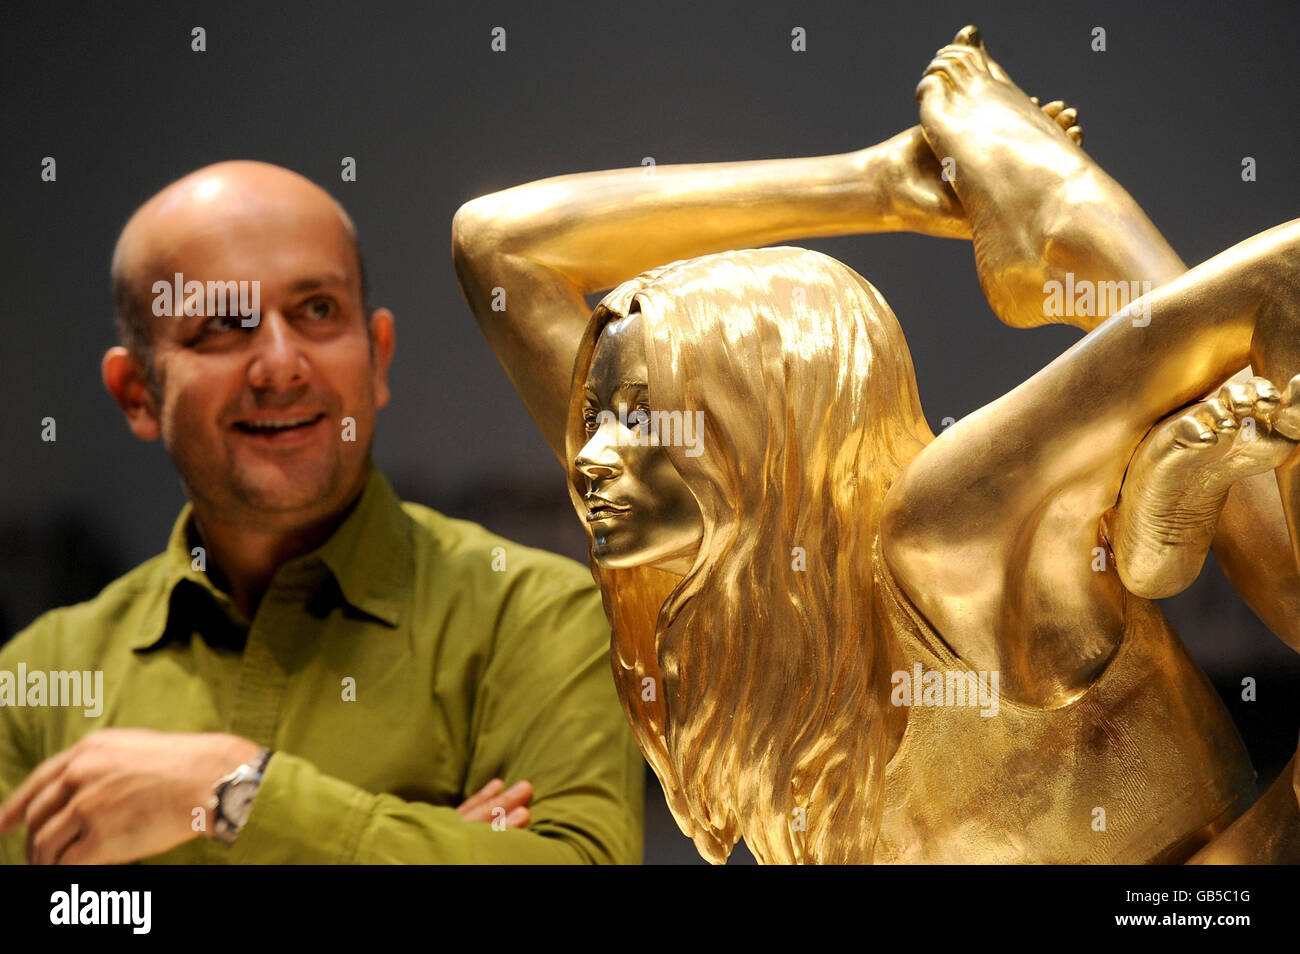 Marc Quinn with his 50kg solid gold statue of supermodel Kate Moss in a yogic pose called 'Siren' is unveiled at the opening of the 'Statuephilia' exhibition at the British Museum in London. Stock Photo